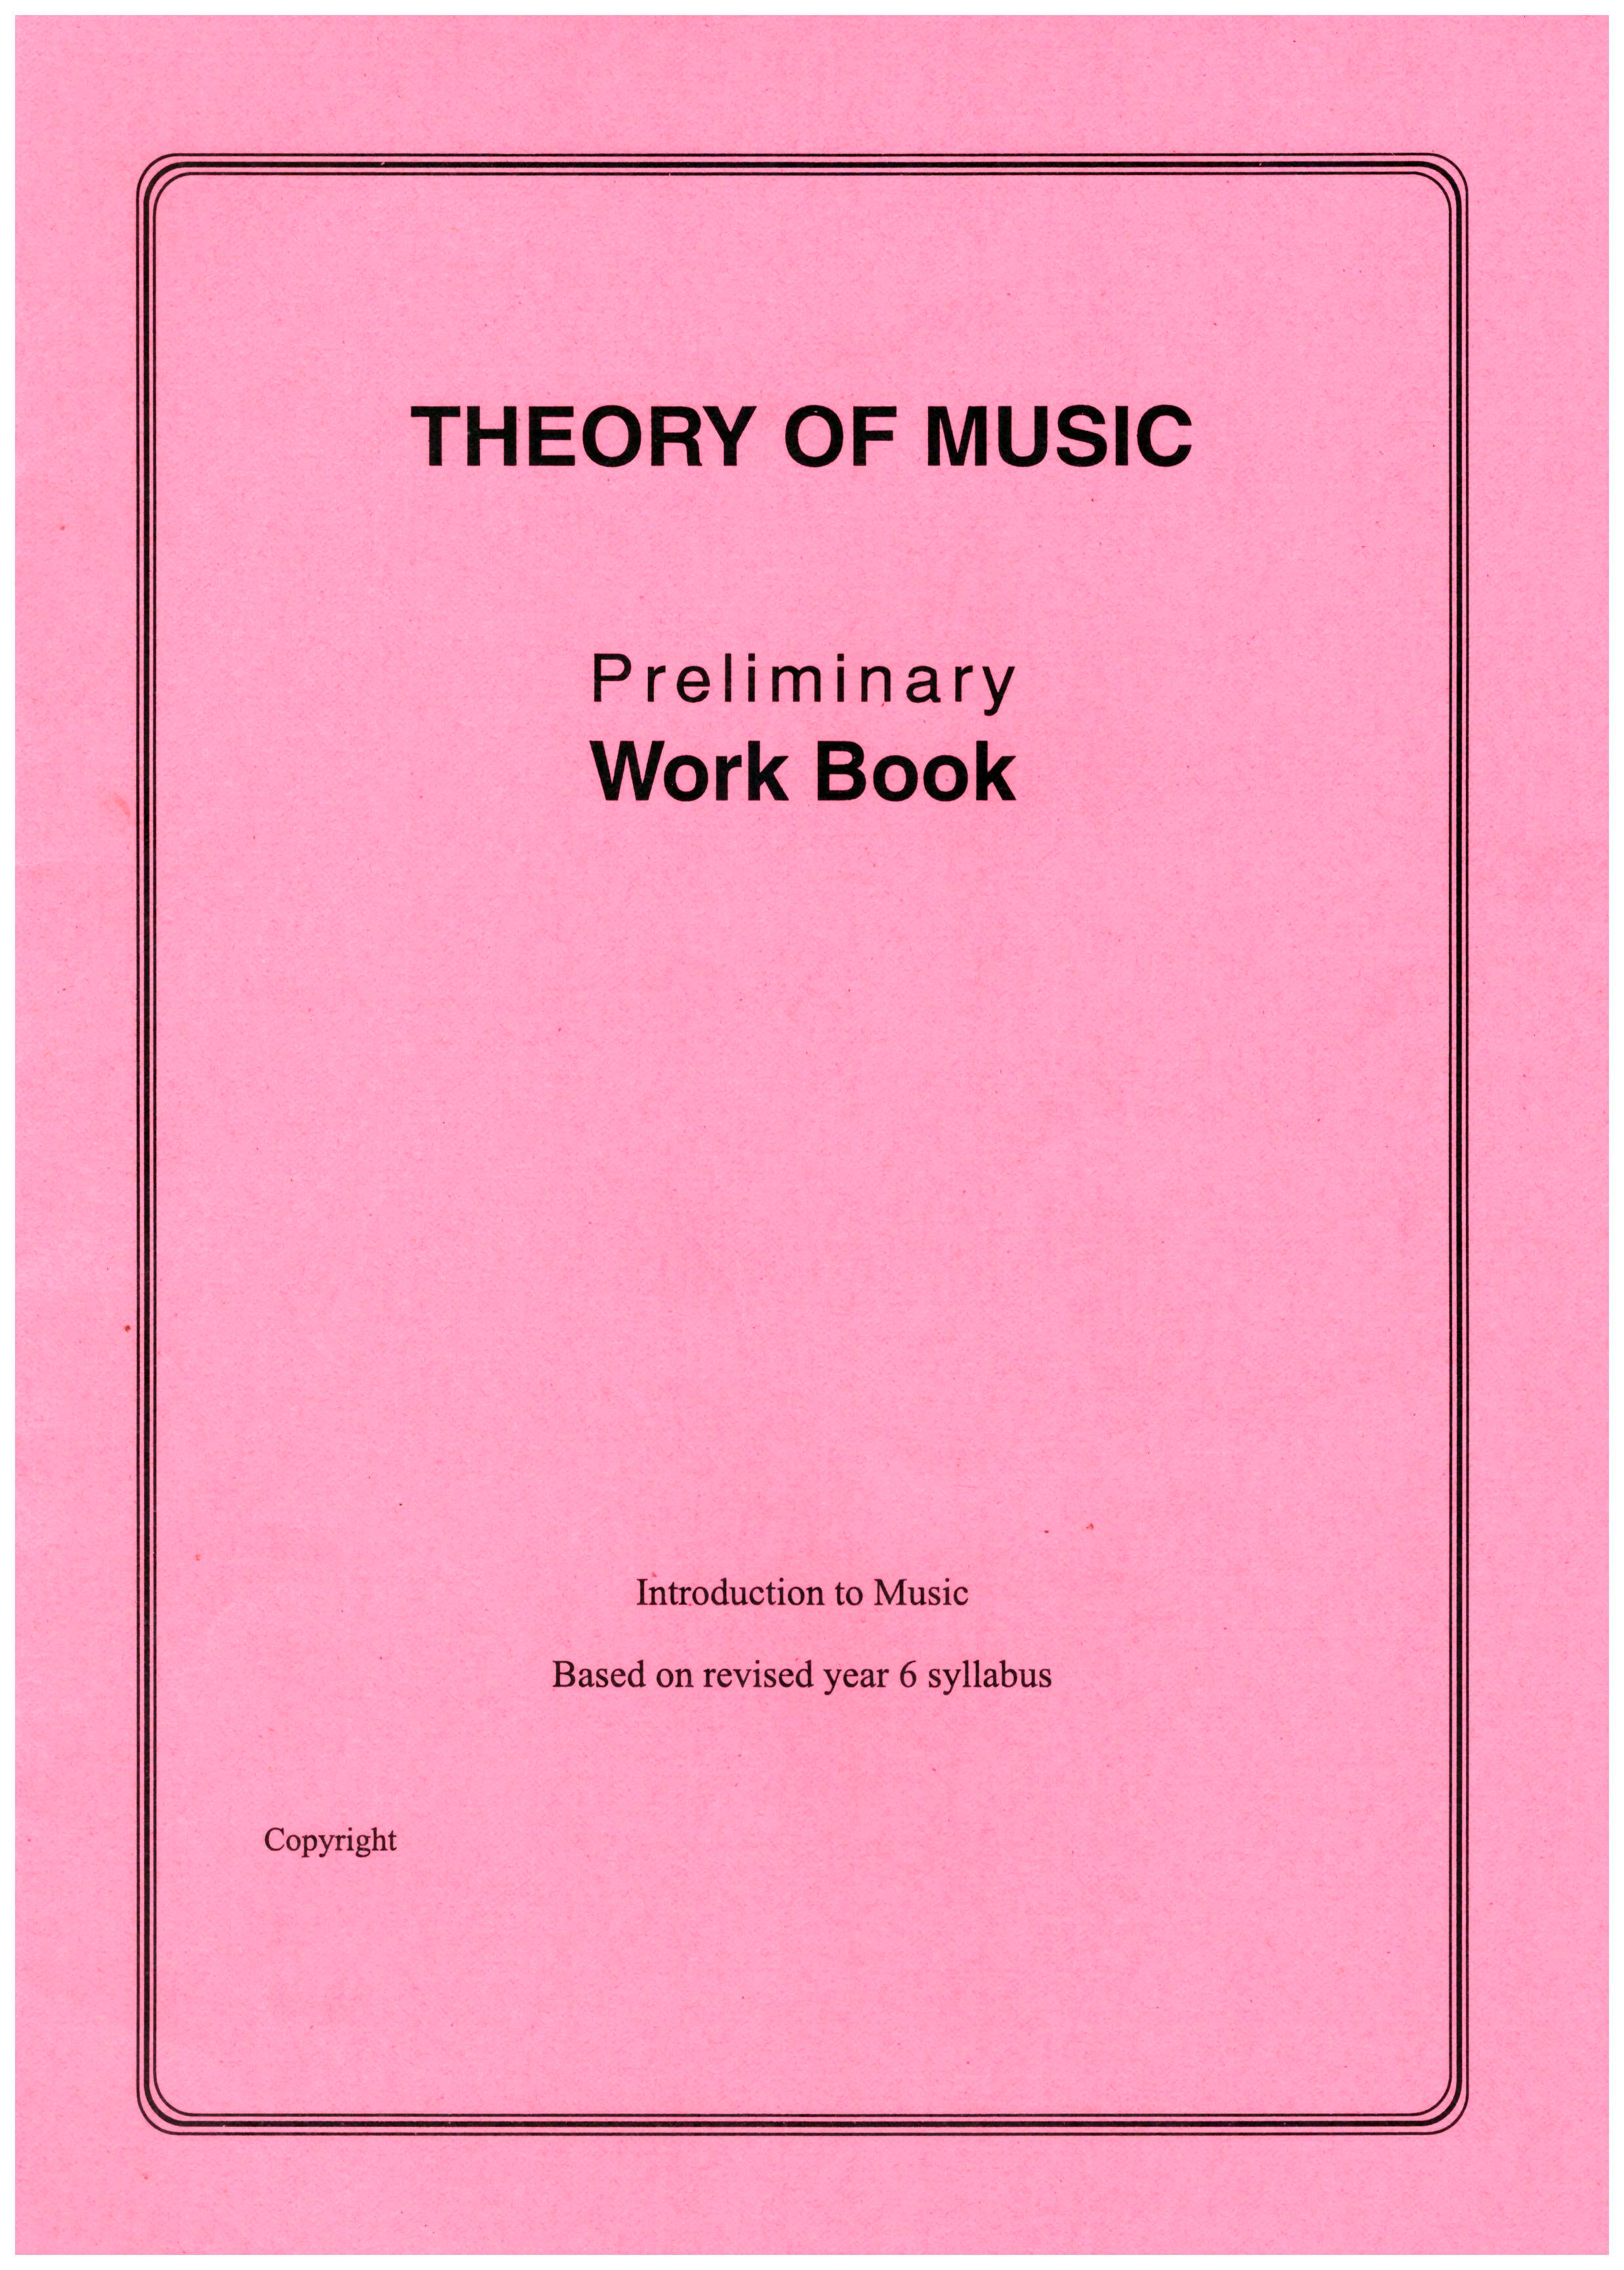 The Theory of Music Preliminary Work Book